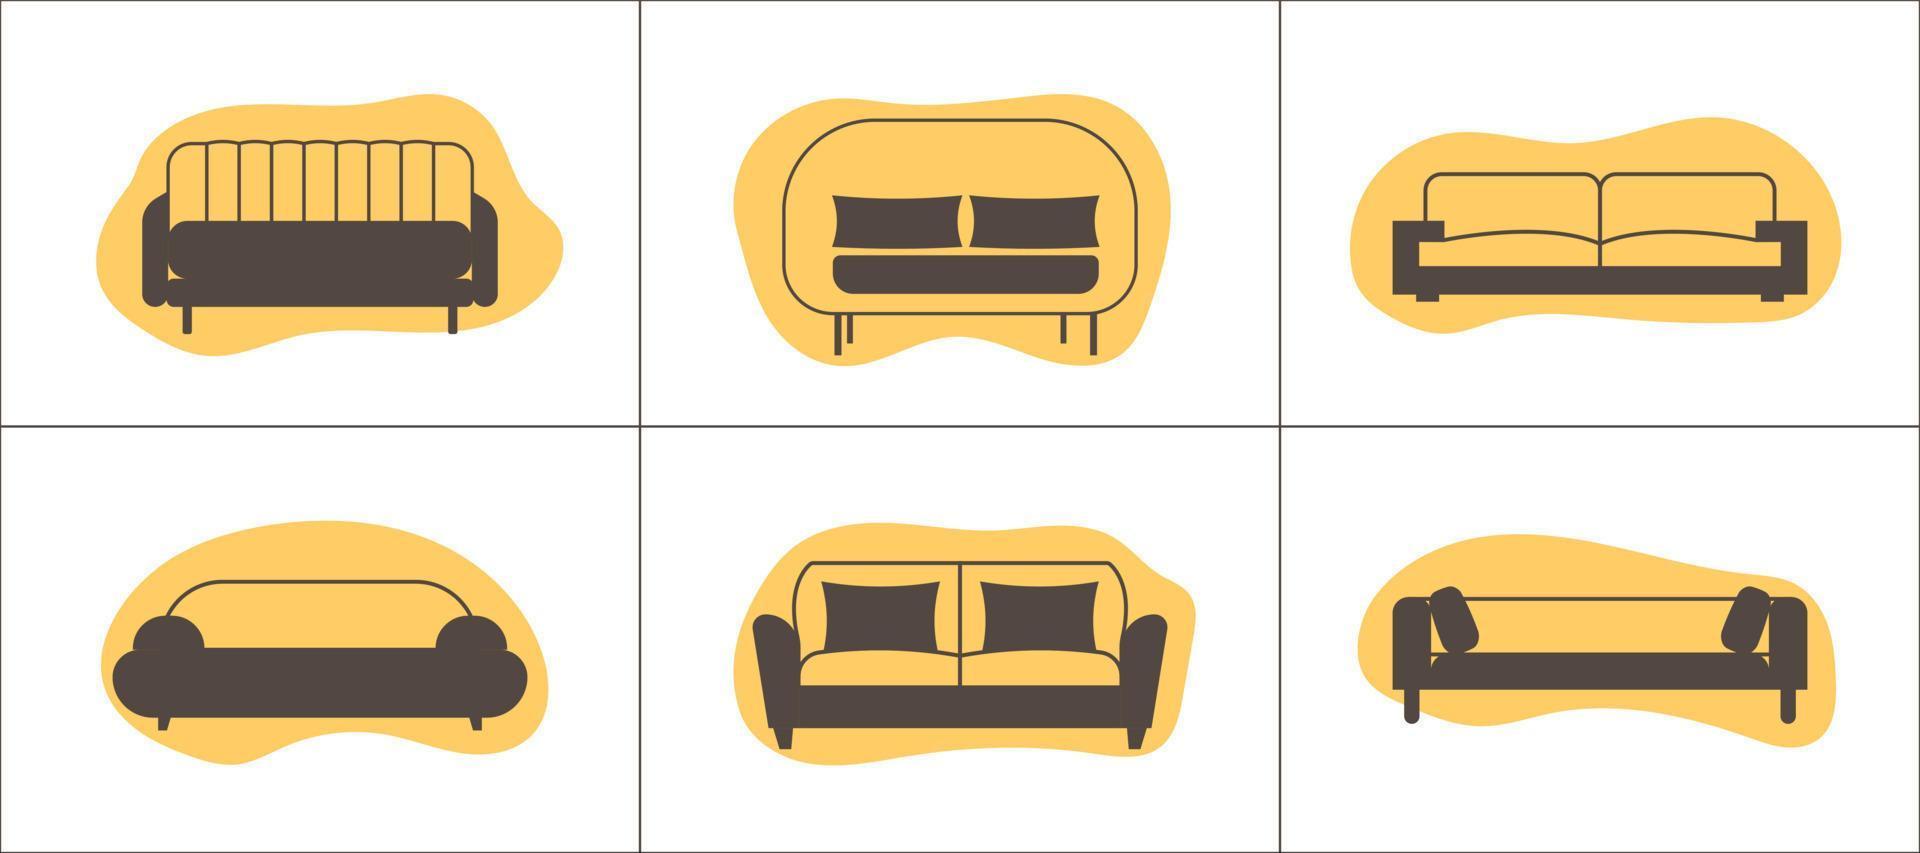 Sofa icons set in flat style. Furniture icons on abstract shapes backgrounds. vector